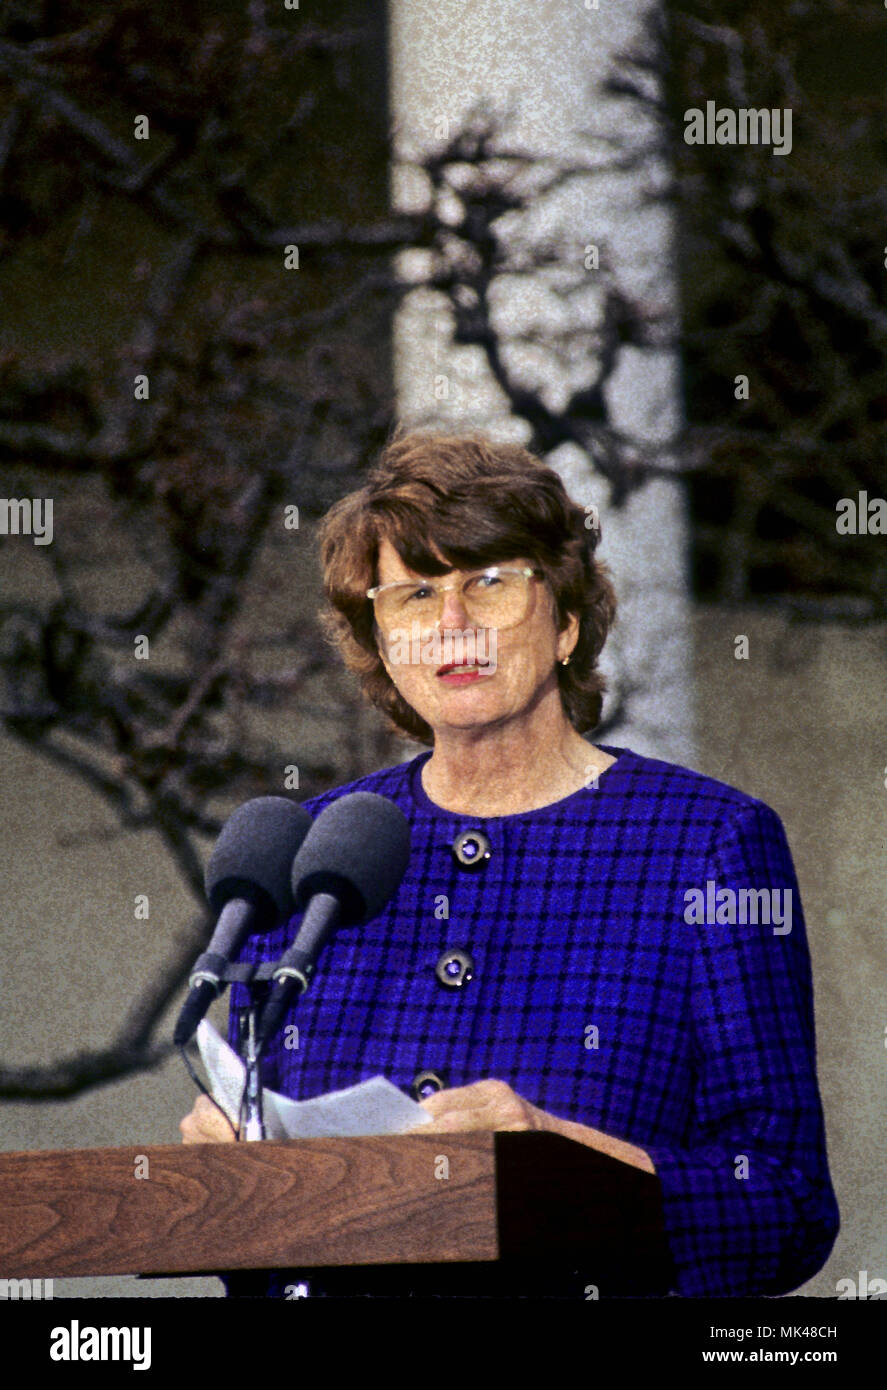 Washington DC., USA, February 11, 1993 United States Attorney General Designate Janet Reno speaks to reporters in the Rose Garden of the White House. After being introduced by President William Clinton as his nominee for the position of Attorney General of the United States. Stock Photo